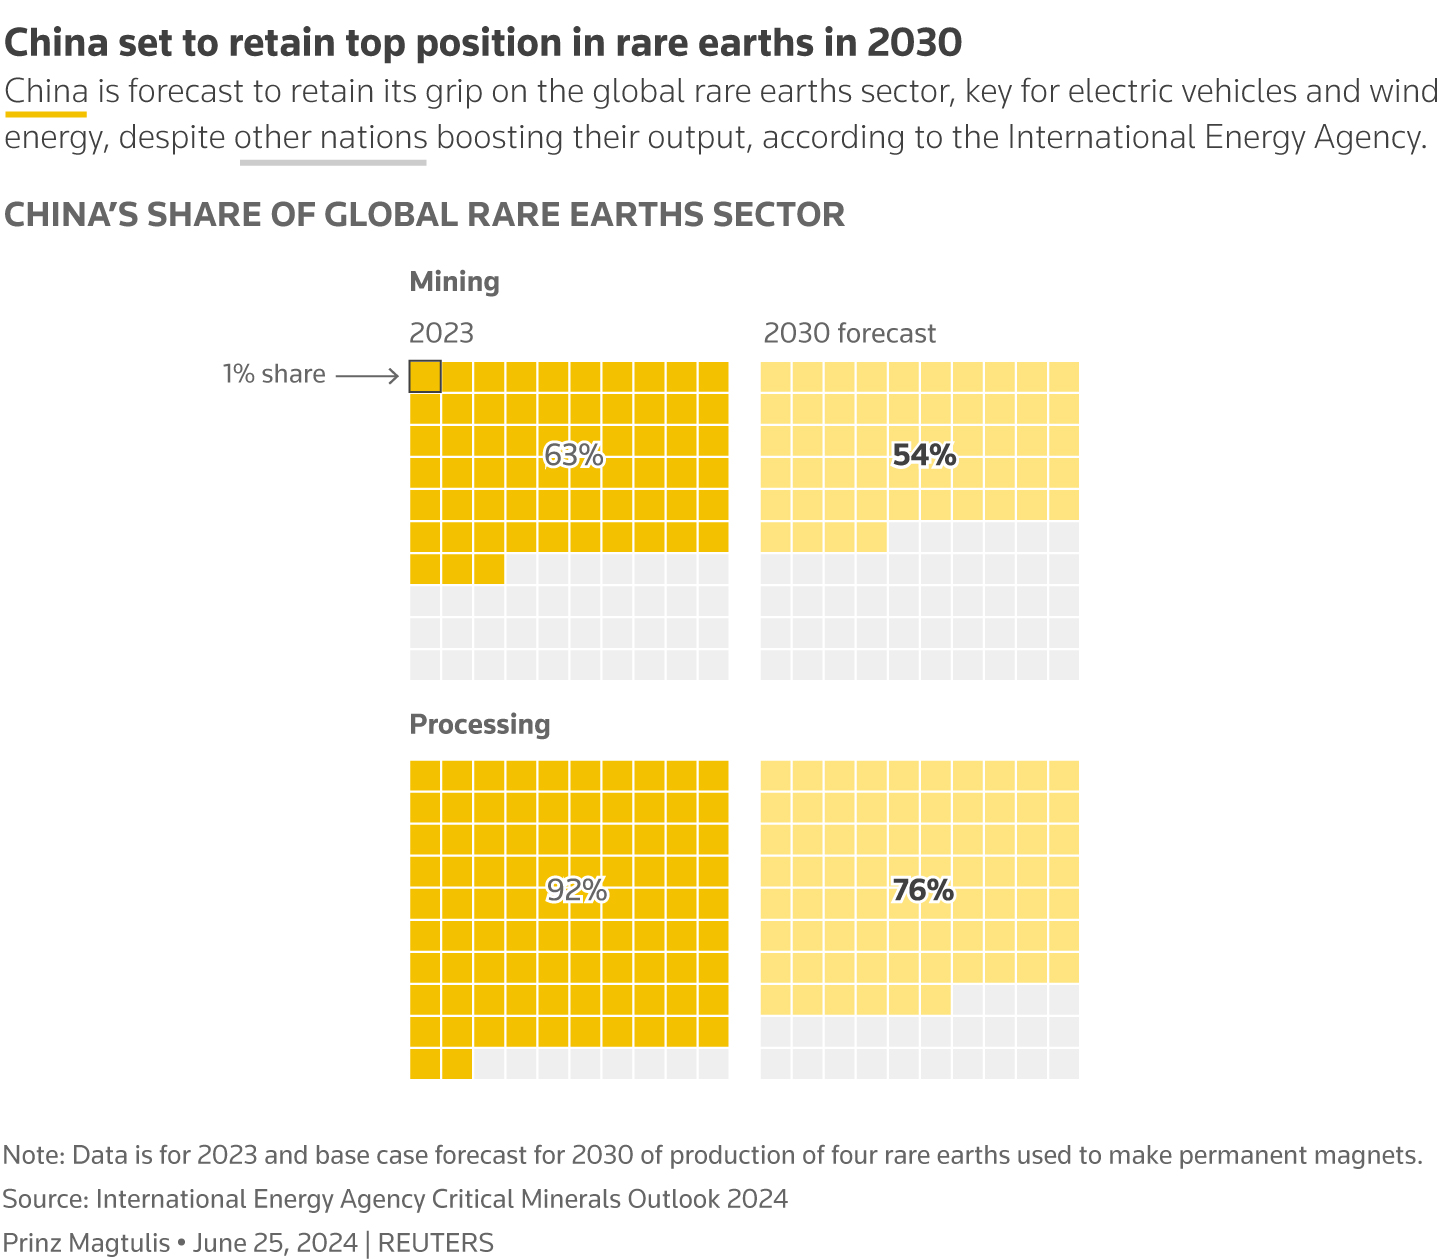 A waffle chart showing the share of China on global rare earths sector for both mining and processing for the year 2023 and projected for 2030.